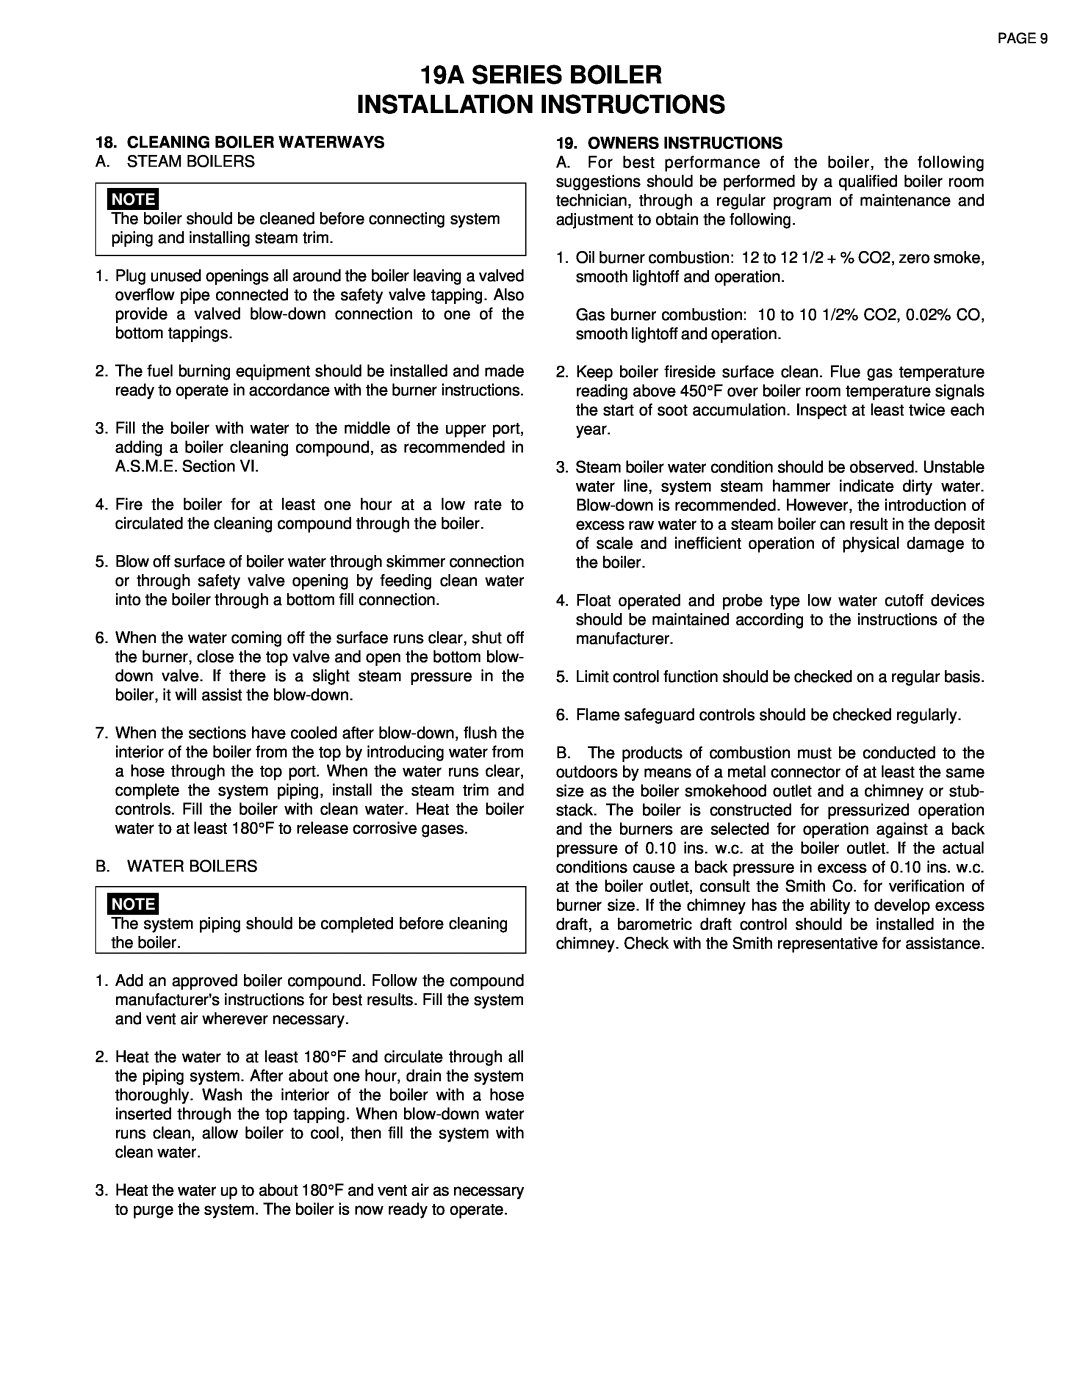 Smith Cast Iron Boilers 19A SERIES BOILER INSTALLATION INSTRUCTIONS, Cleaning Boiler Waterways, Owners Instructions 